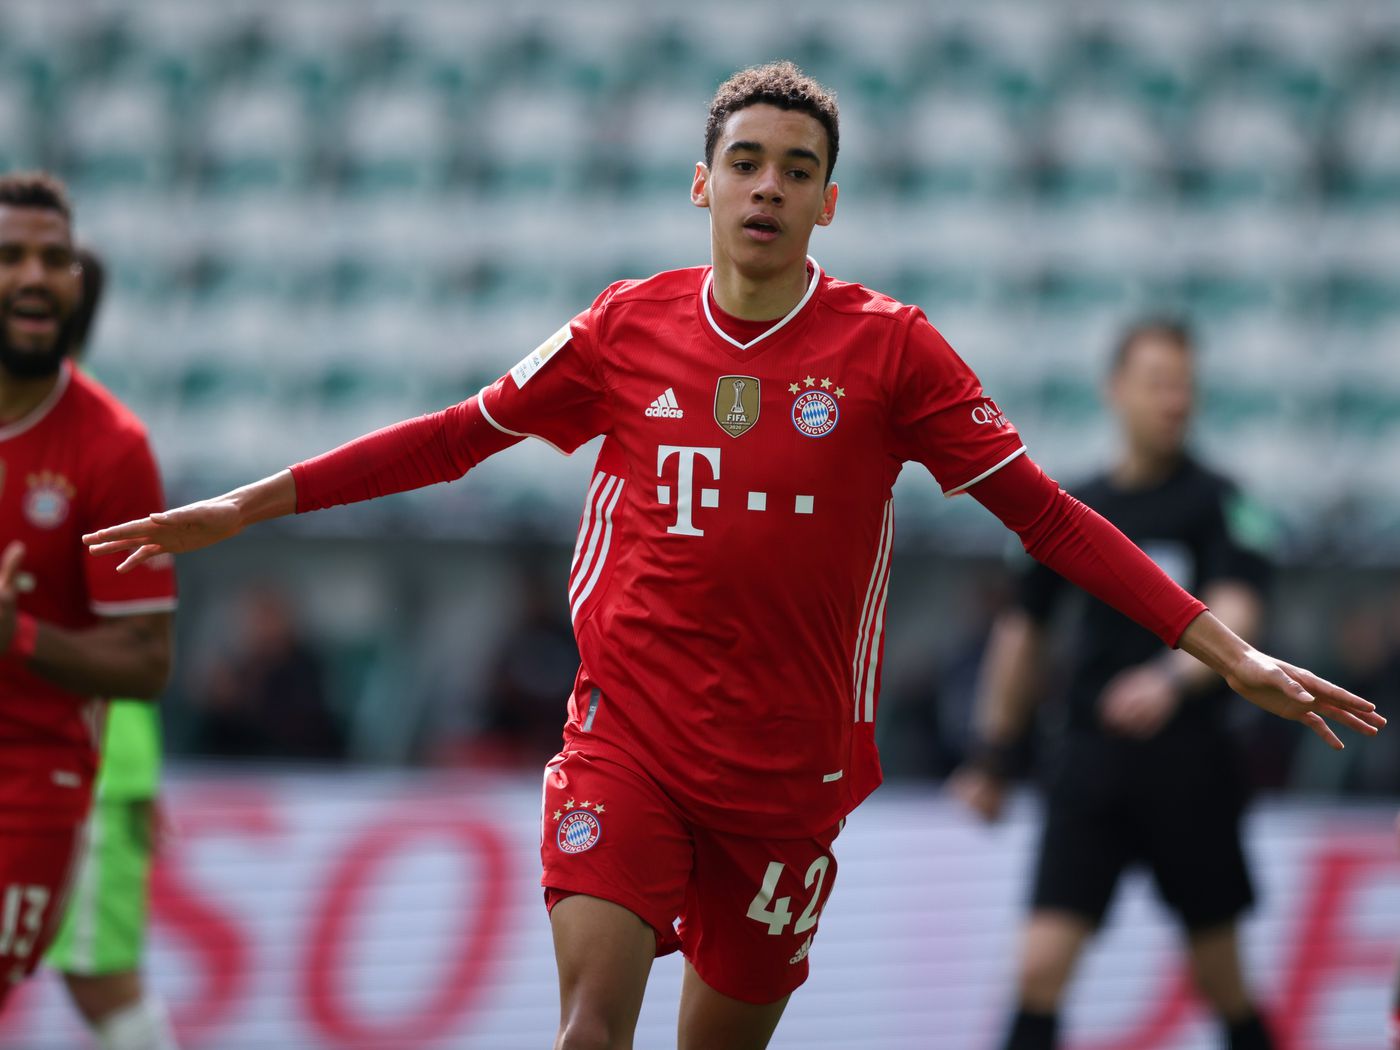 Weekend Warm Up: Bayern Munich Can Trust Jamal Musiala To Play A Bigger Role Next Season; Bundesliga Predictions; Some Pearl Jam To Get Your Weekend Going; And MORE! Football Works